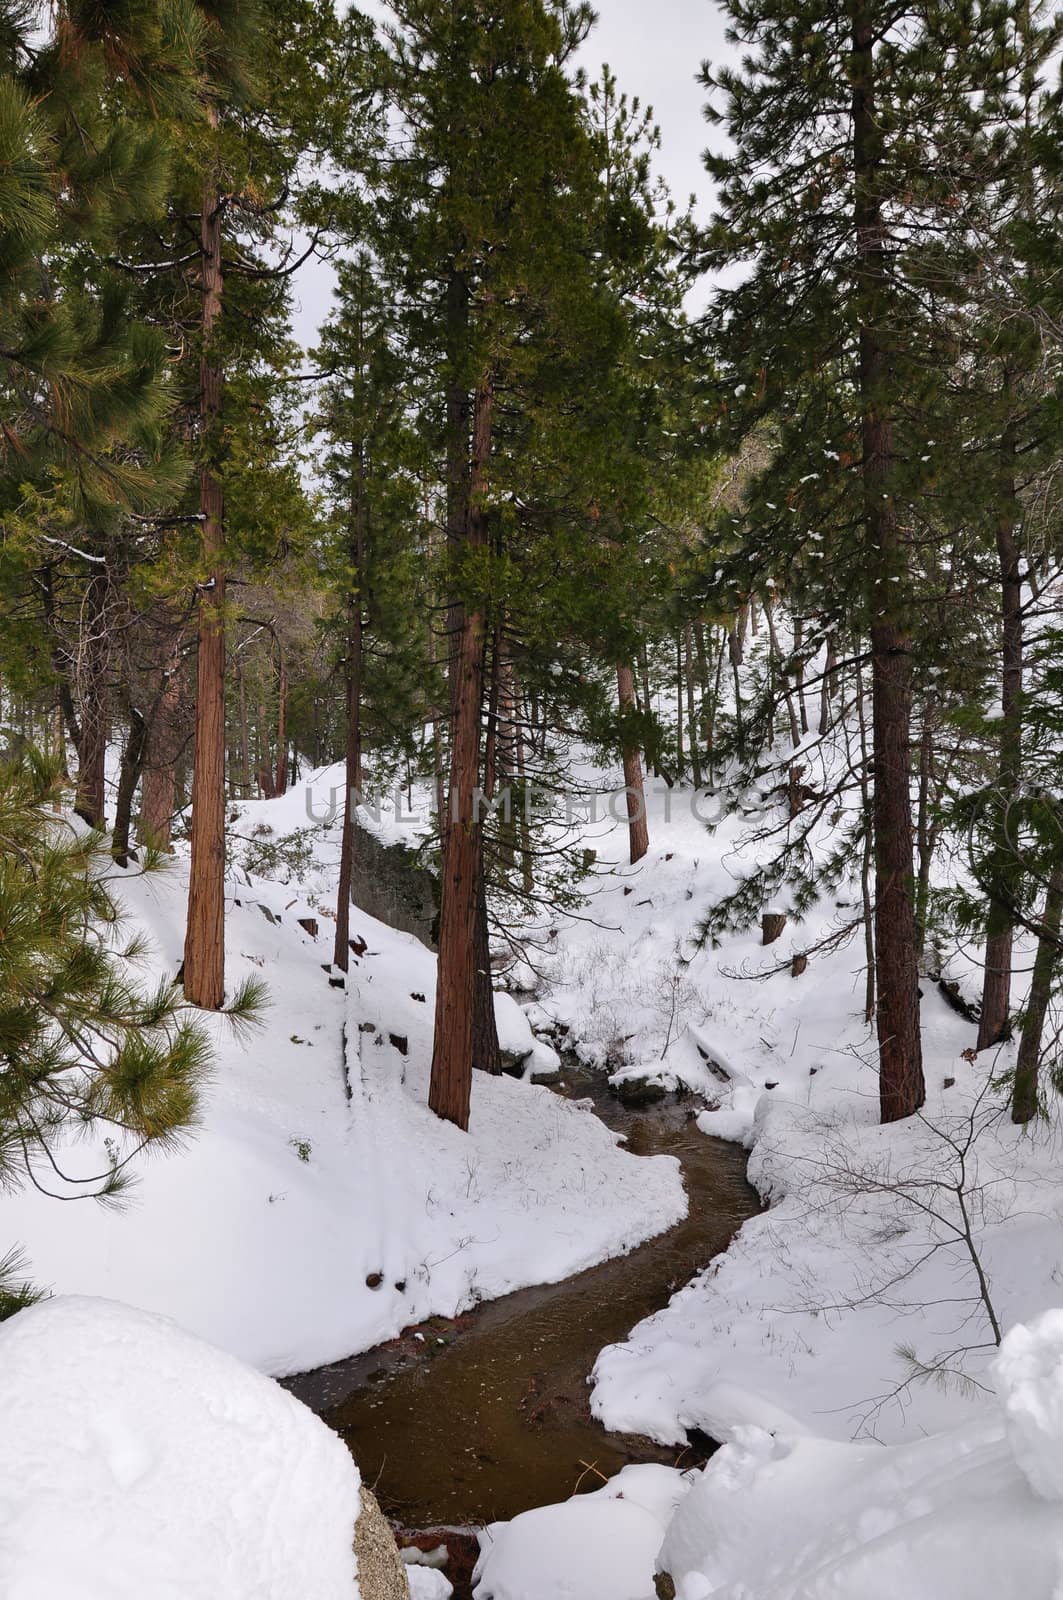 A small stream winds through the forest on Mount San Jacinto in Southern California.